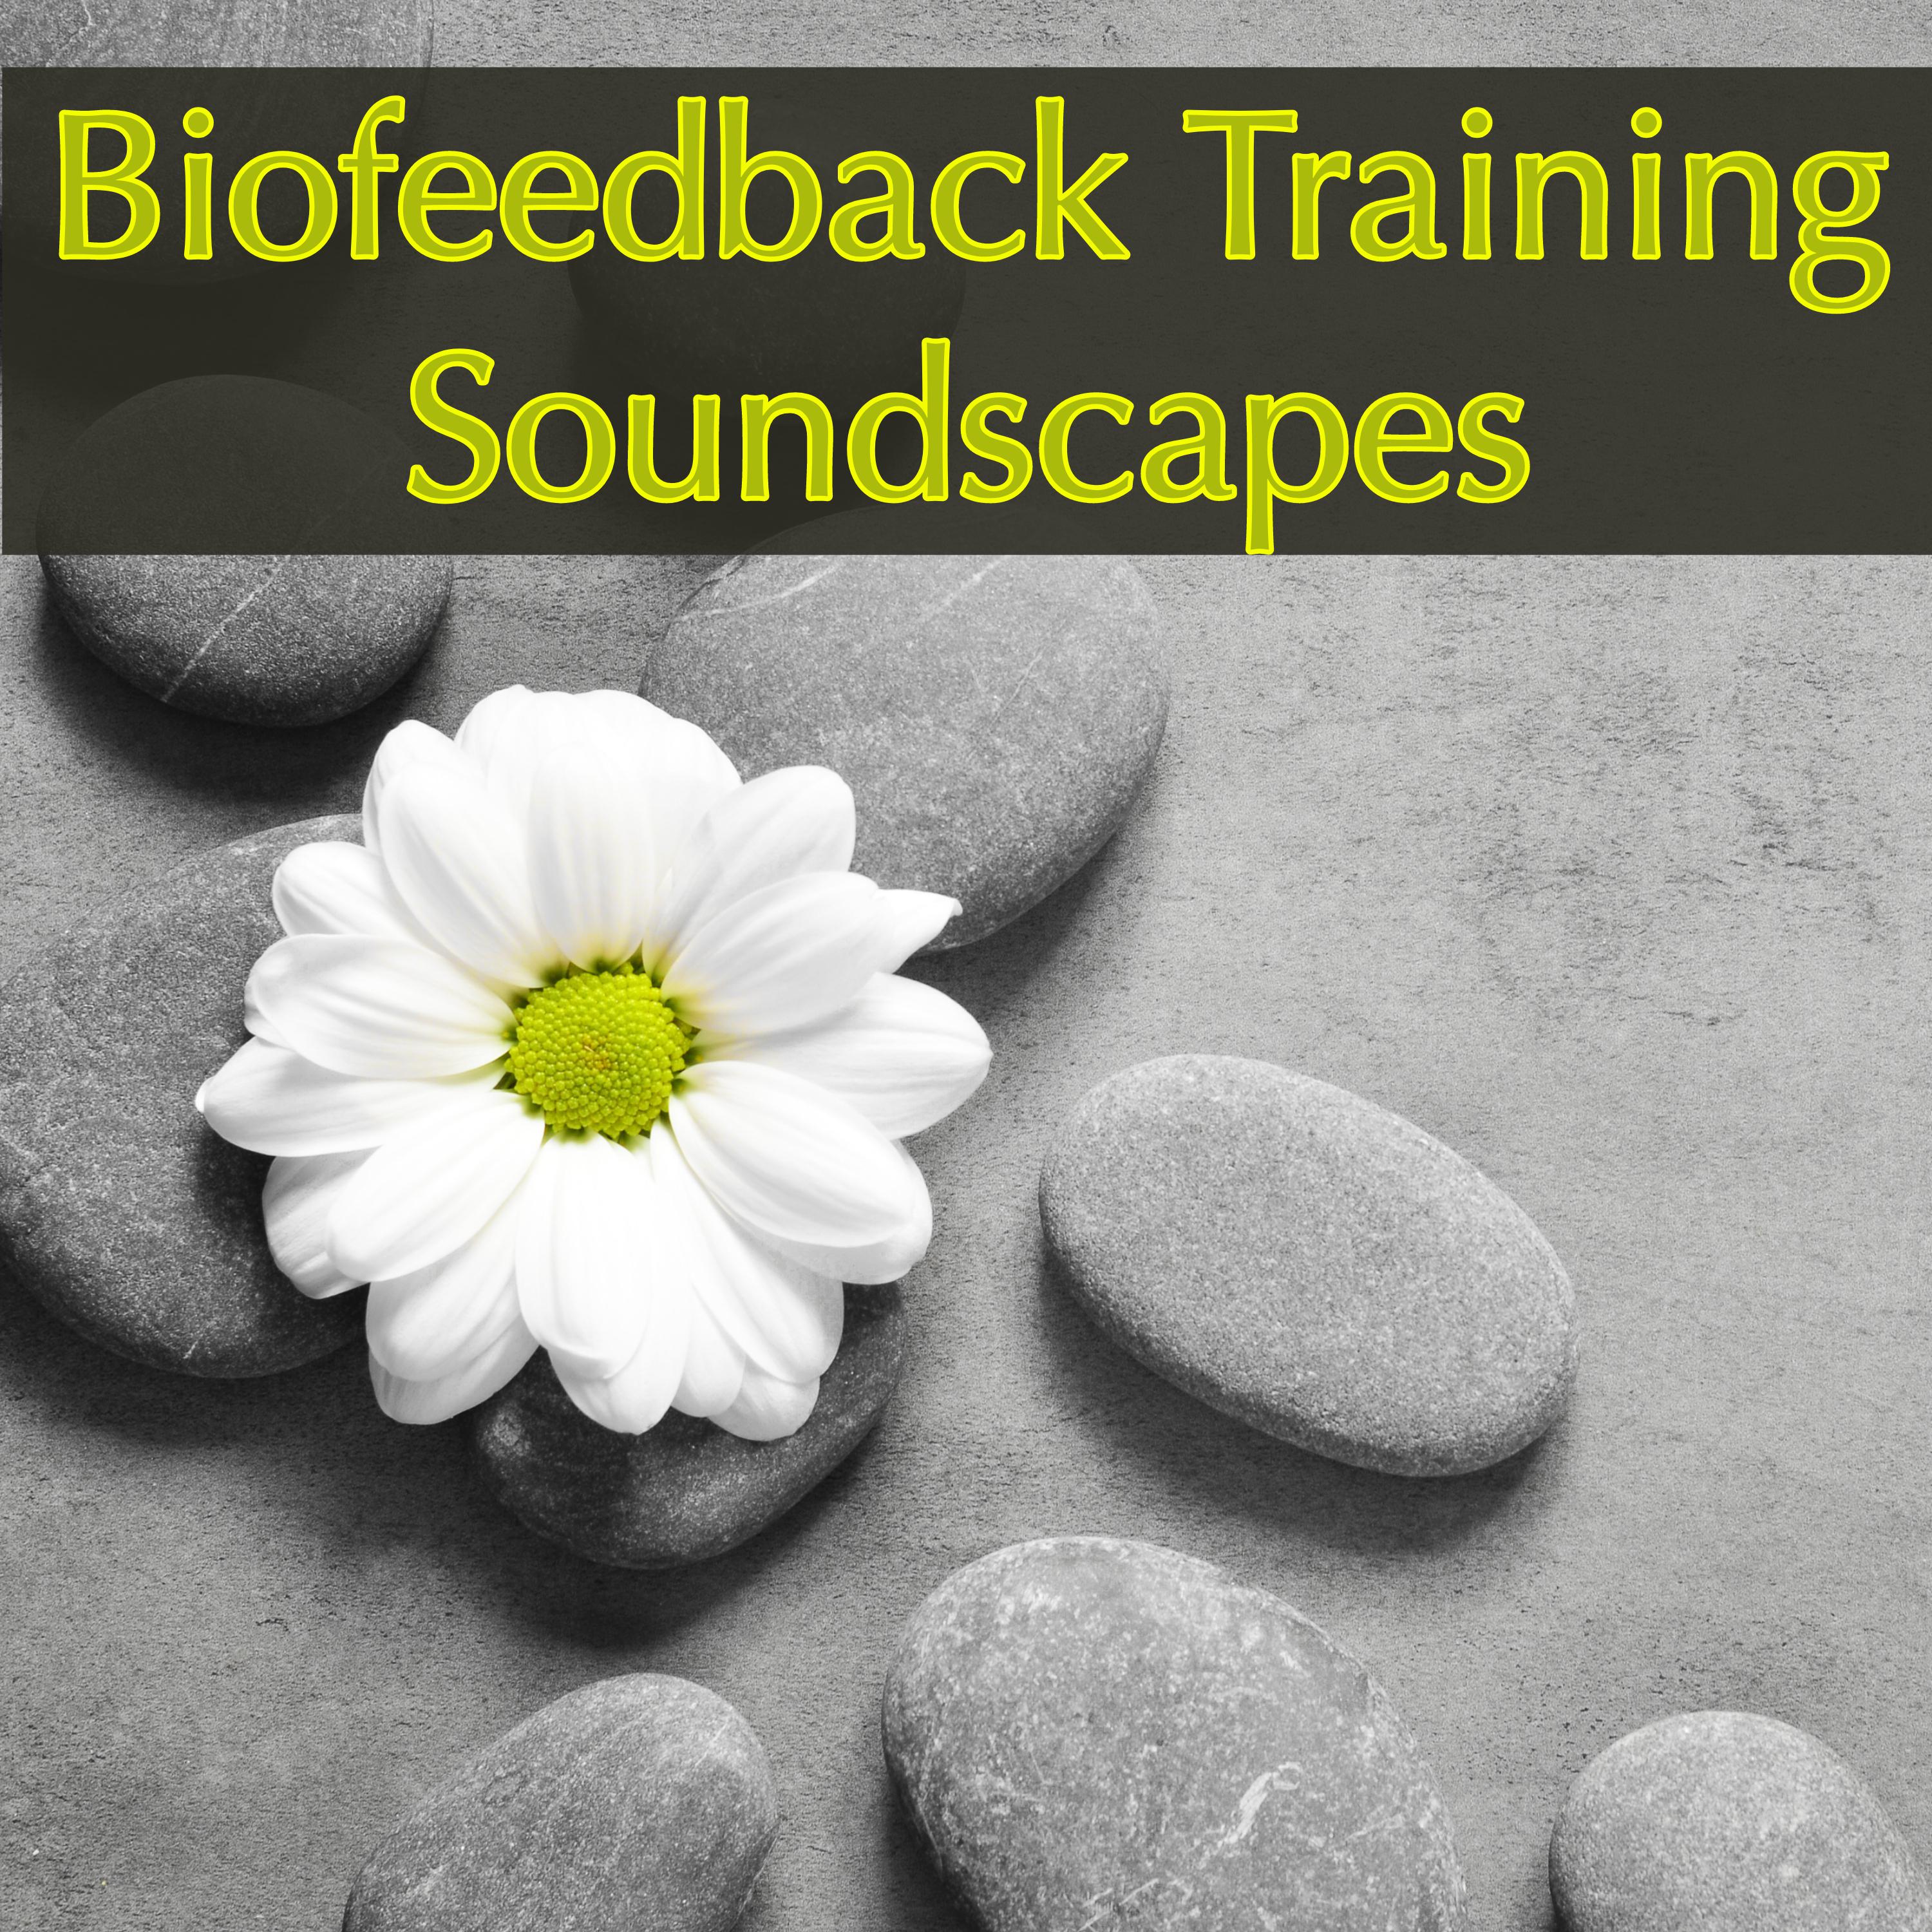 Biofeedback Training Soundscapes – Ambient Music for Biofeedback, to Improve Health & Performance and Exercise Your Brain